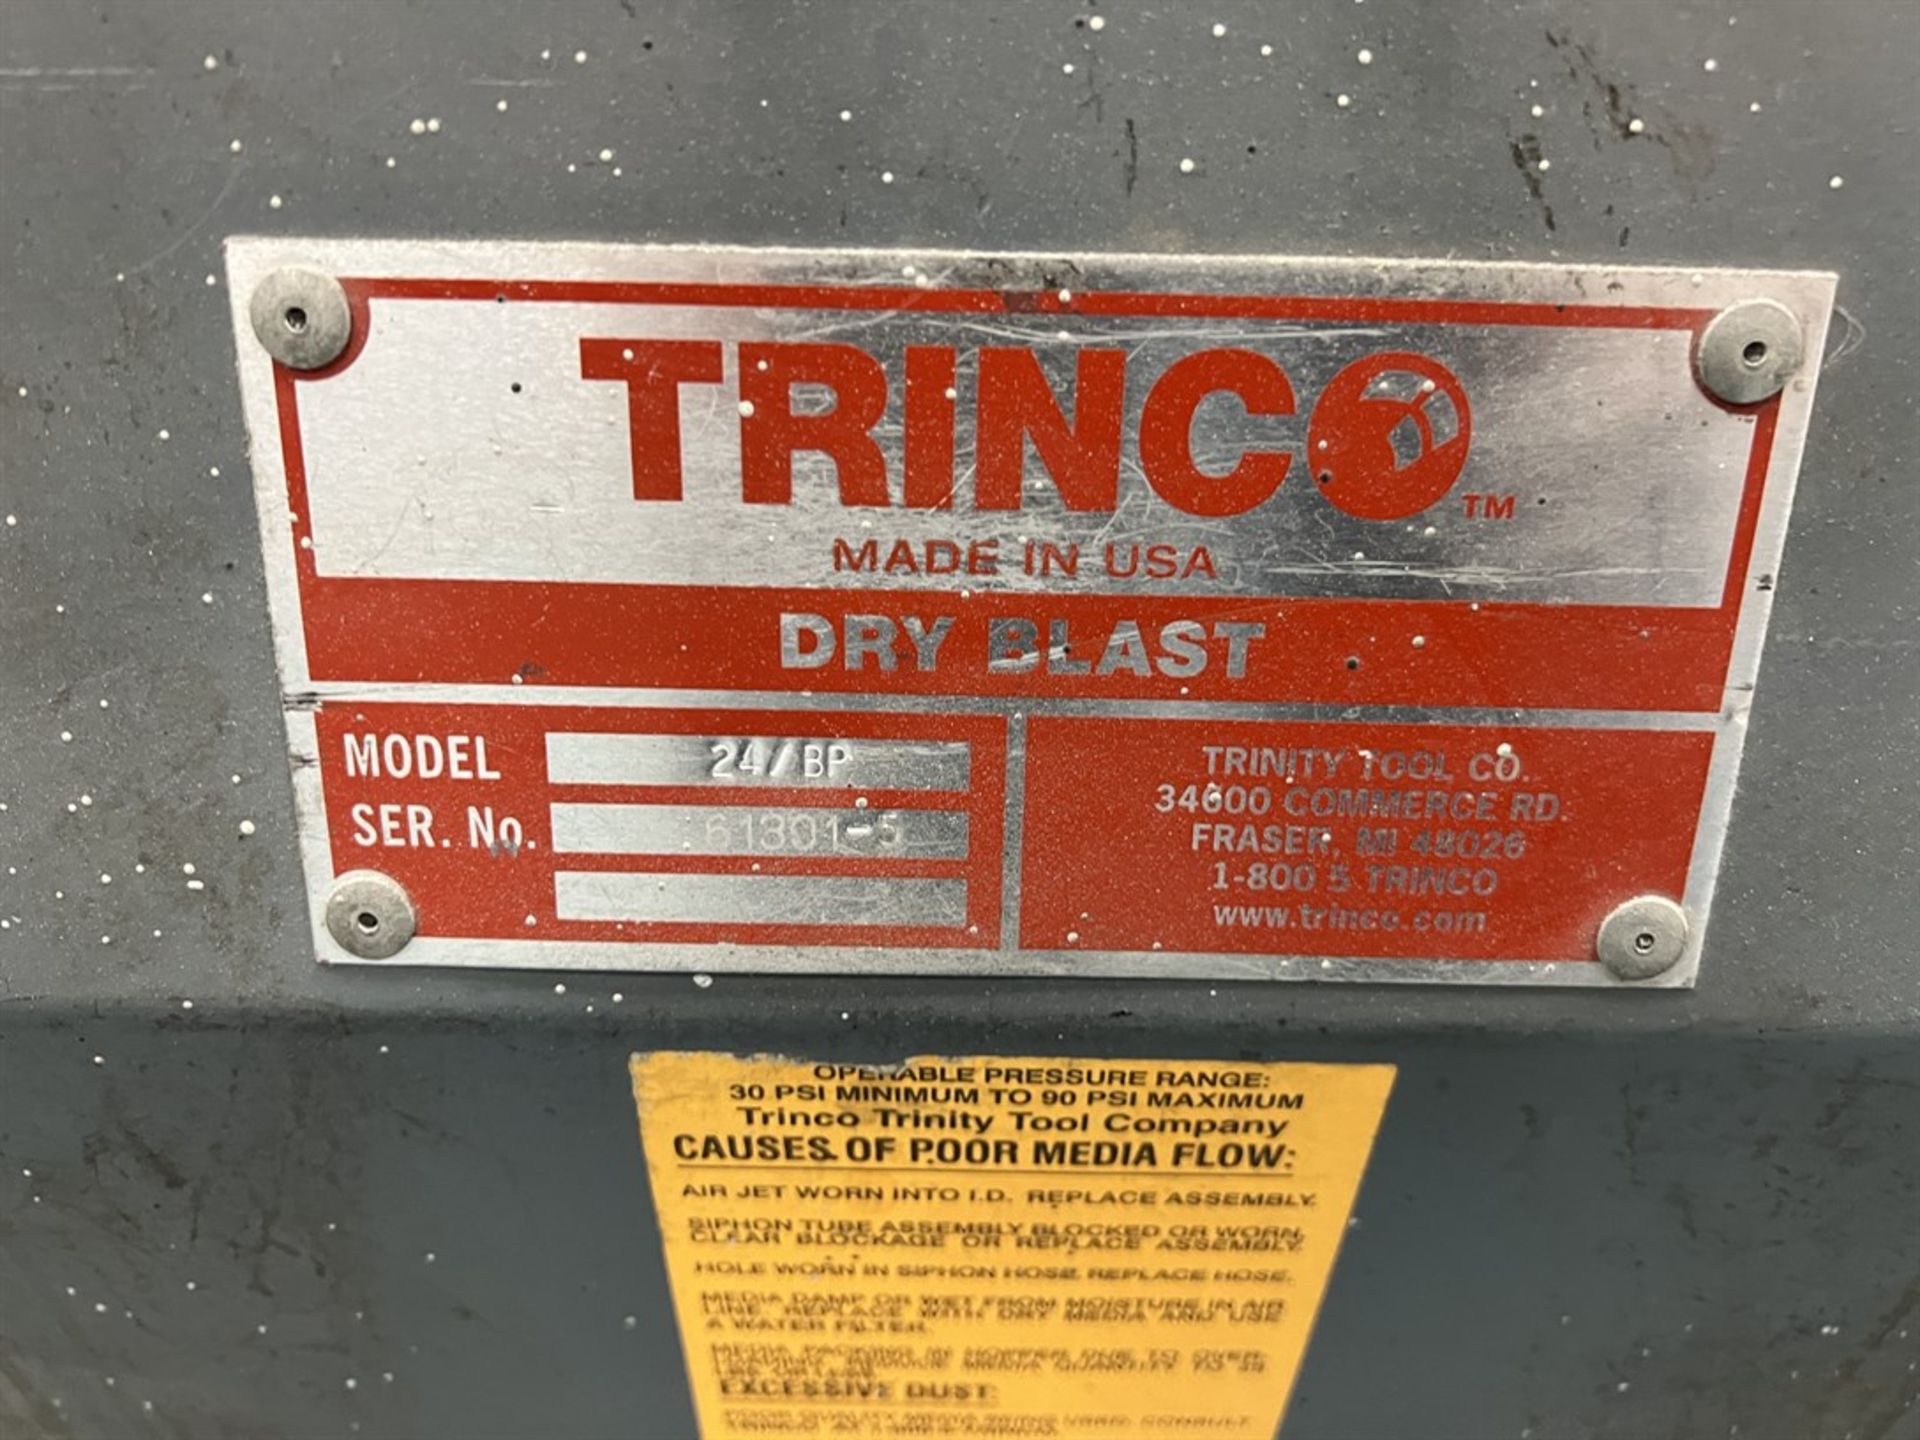 TRINCO 24/BP Dry Blast Cabinet, s/n 61301-5, w/ BP2 Collection System - Image 4 of 6